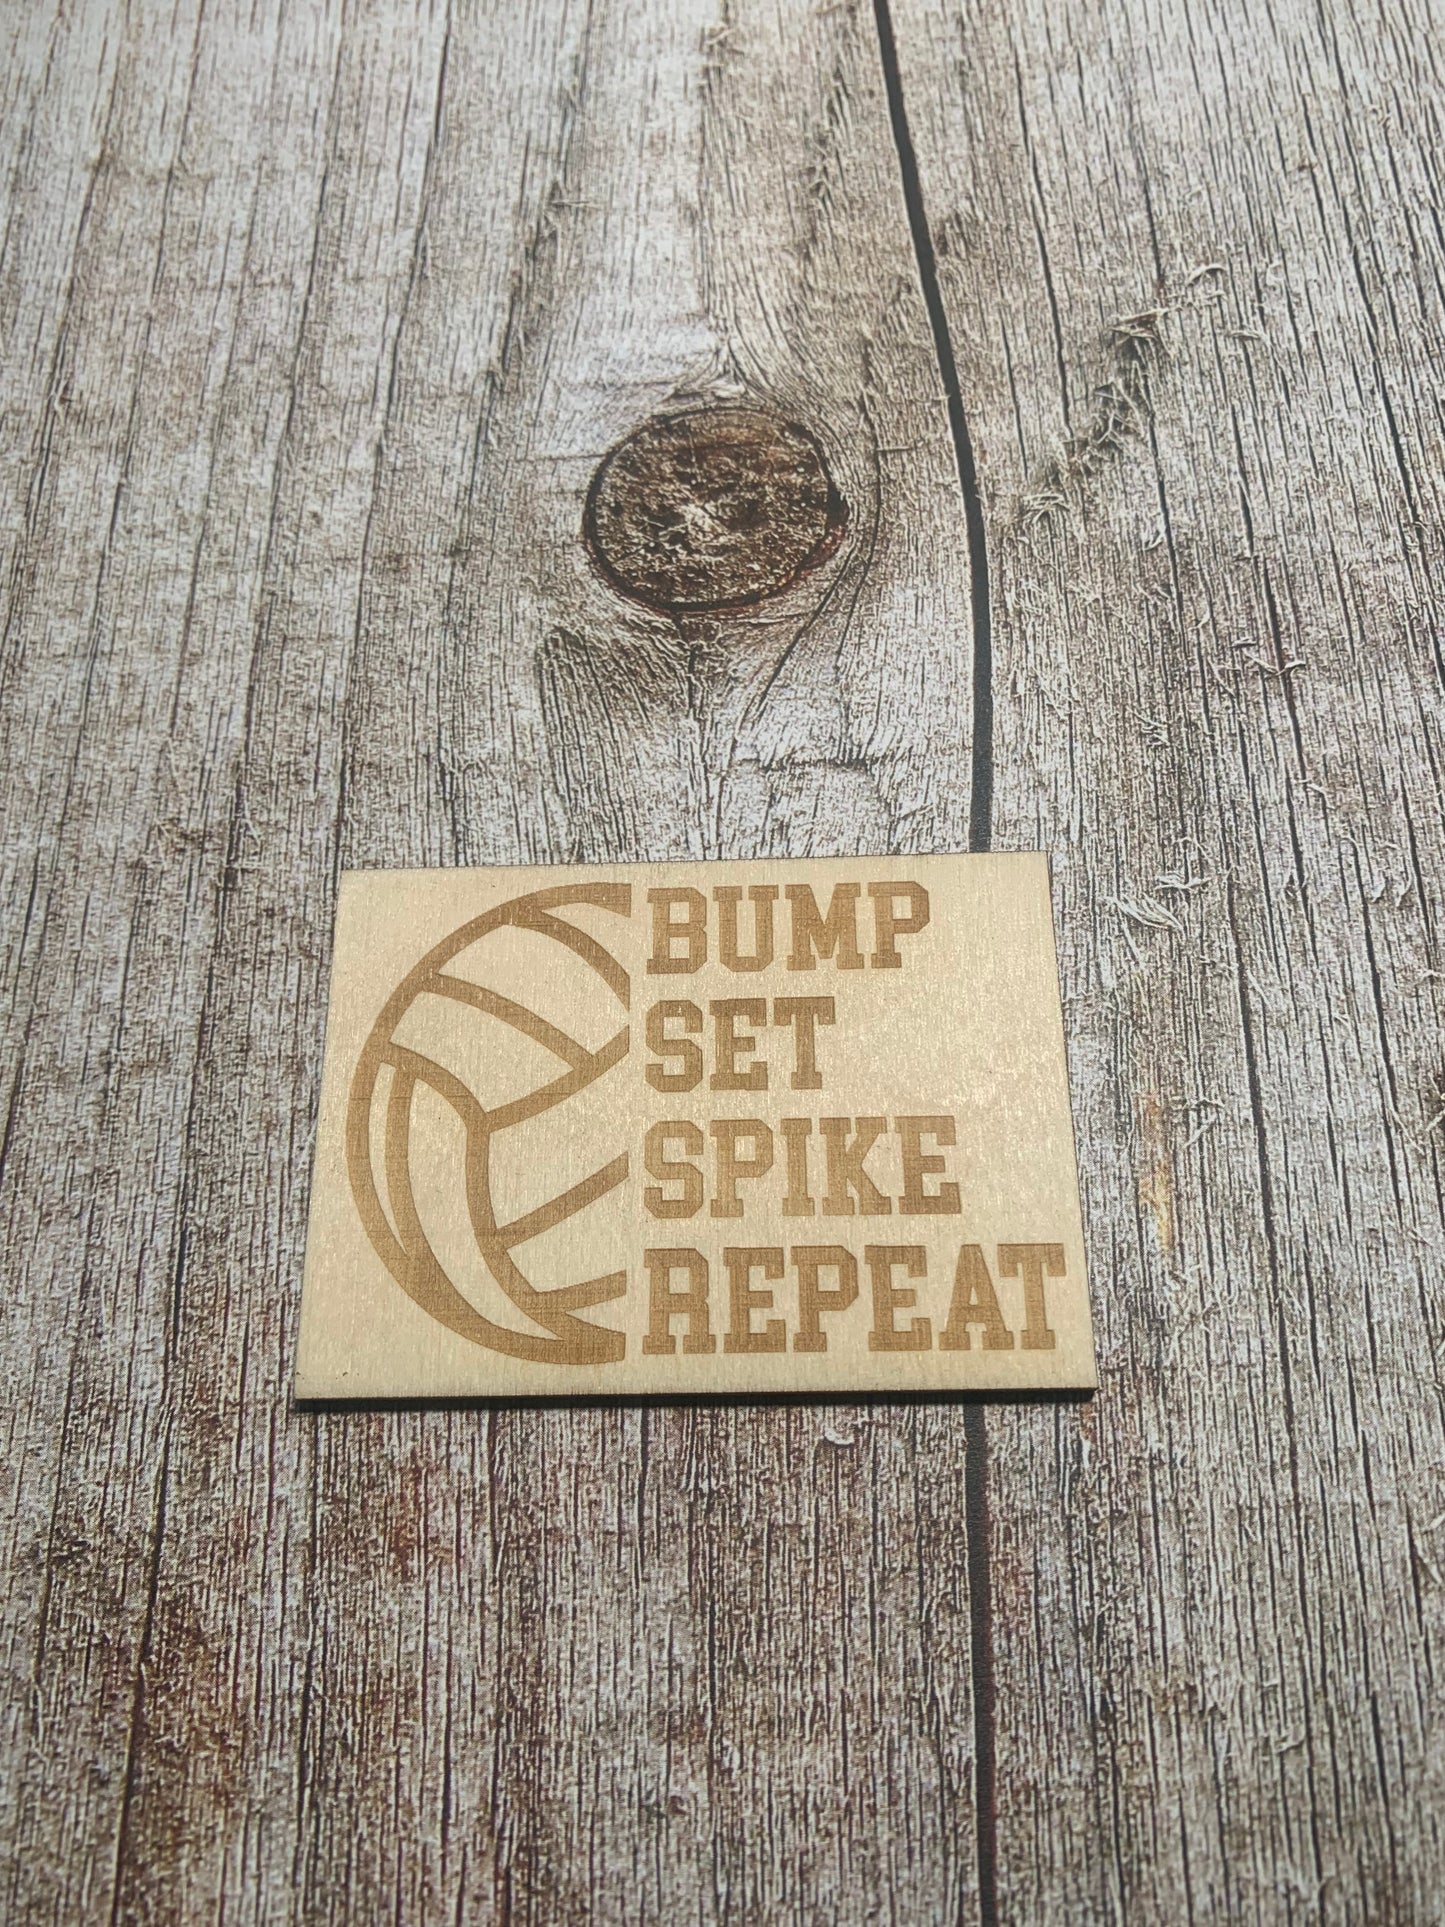 Volleyball - Bump Set Spike Repeat - Creative Designs By Kari